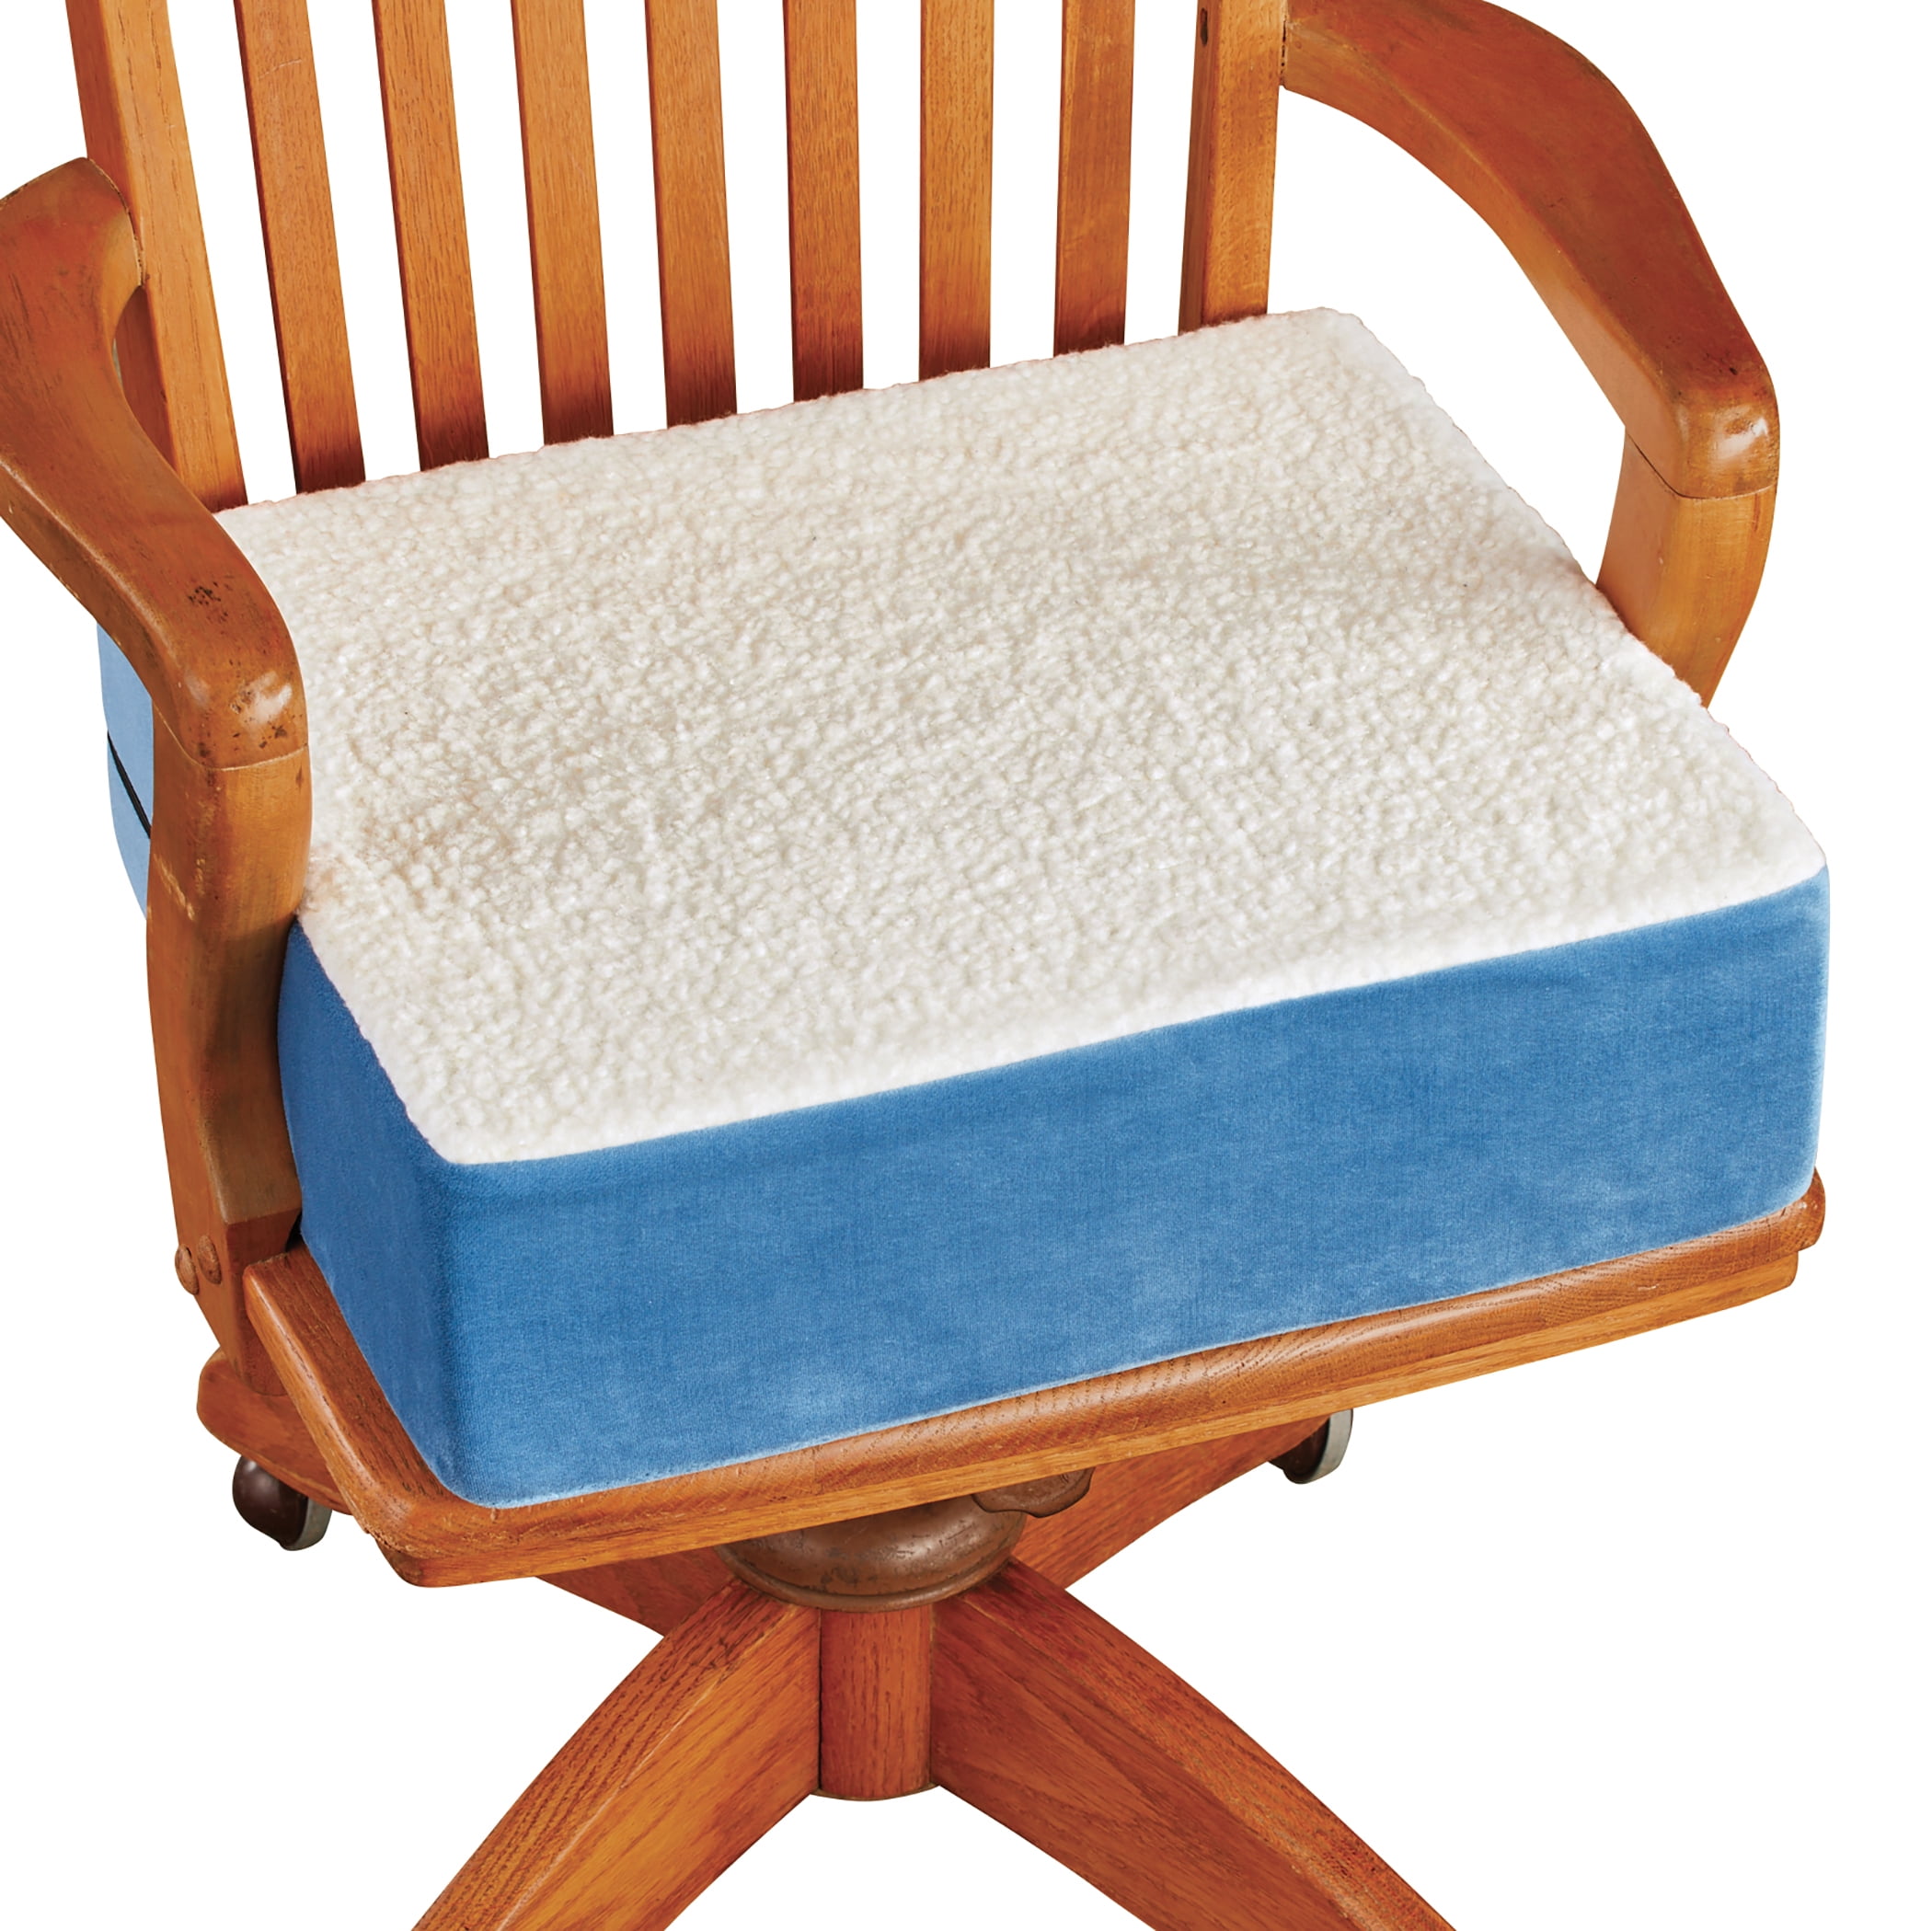 Comfort Finds Rise with Ease Seat Cushion - Thick Firm Chair Cushion  Booster - Extra Thick Foam Pad for Home, Patio, Office and Car Seats -  Extra